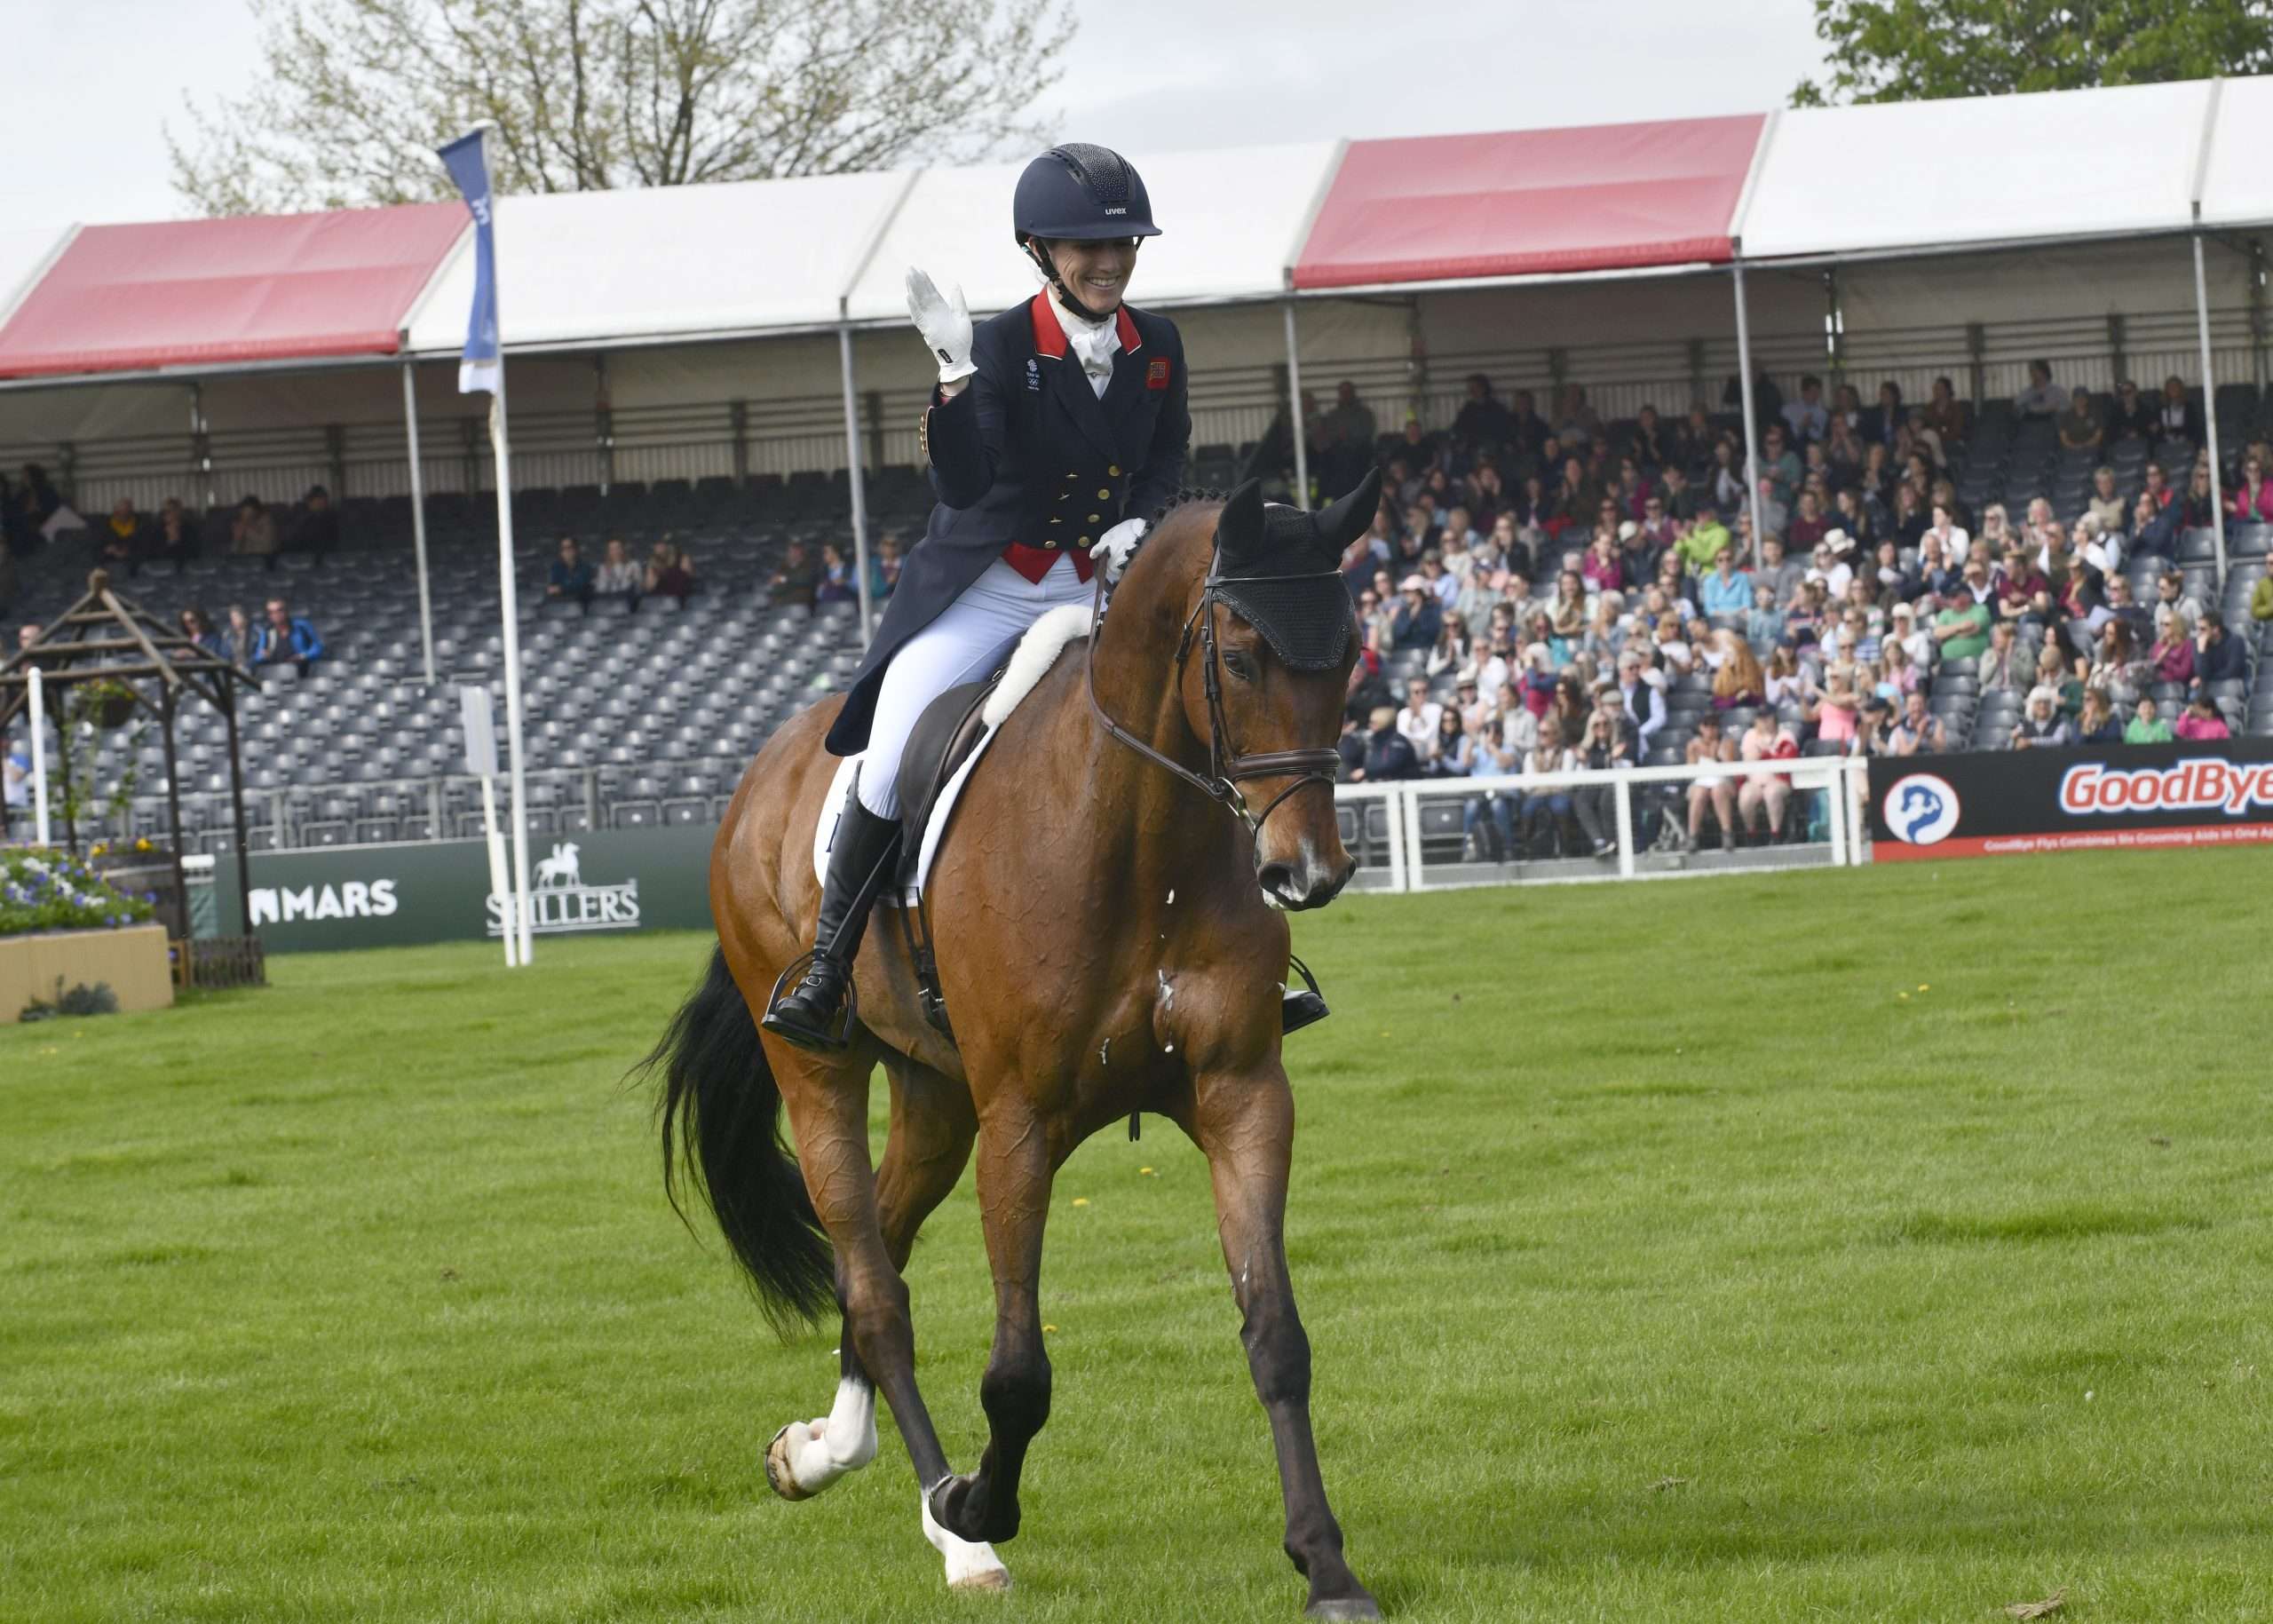 Laura Collett riding London 52 for GREAT BRITAIN